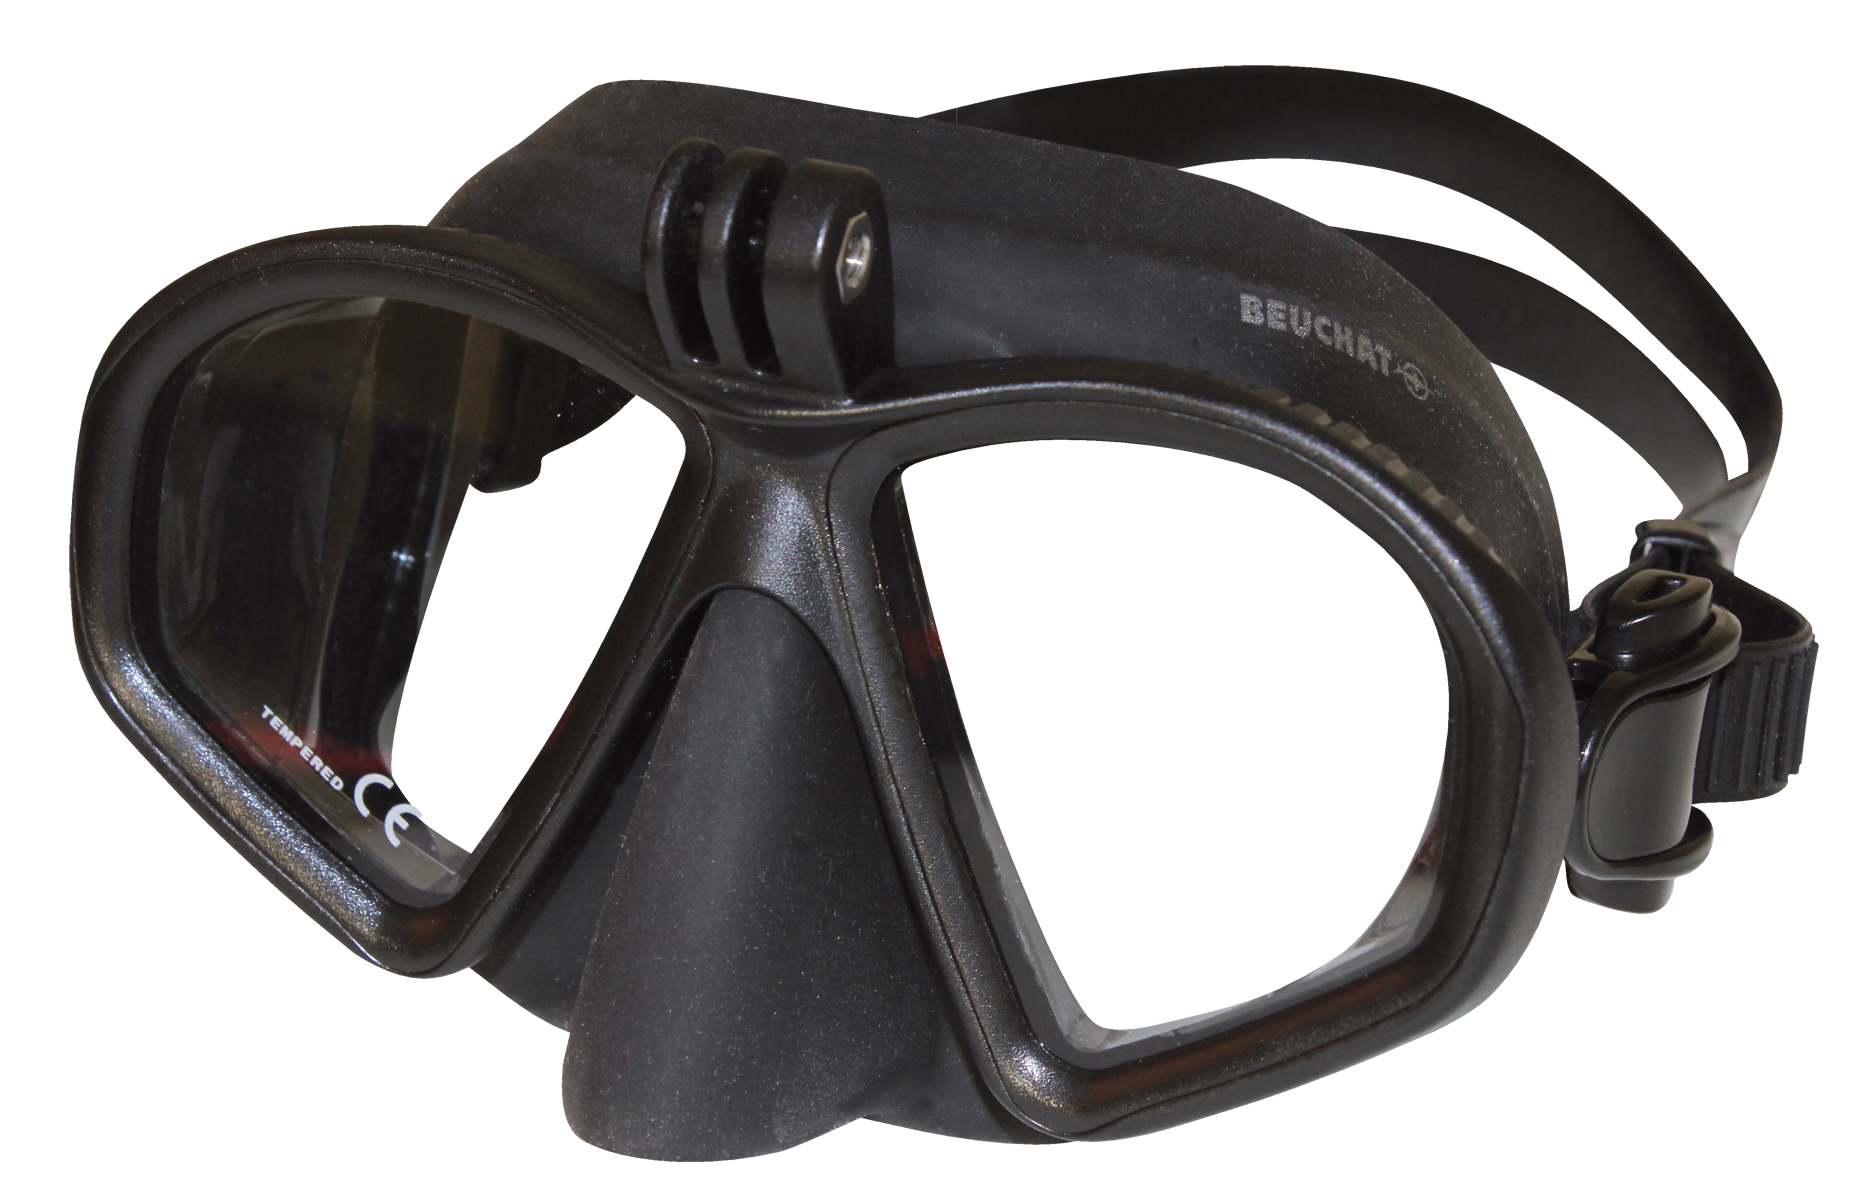 Beuchat GP1 Action Cam Mask - Start Point Spearfishing